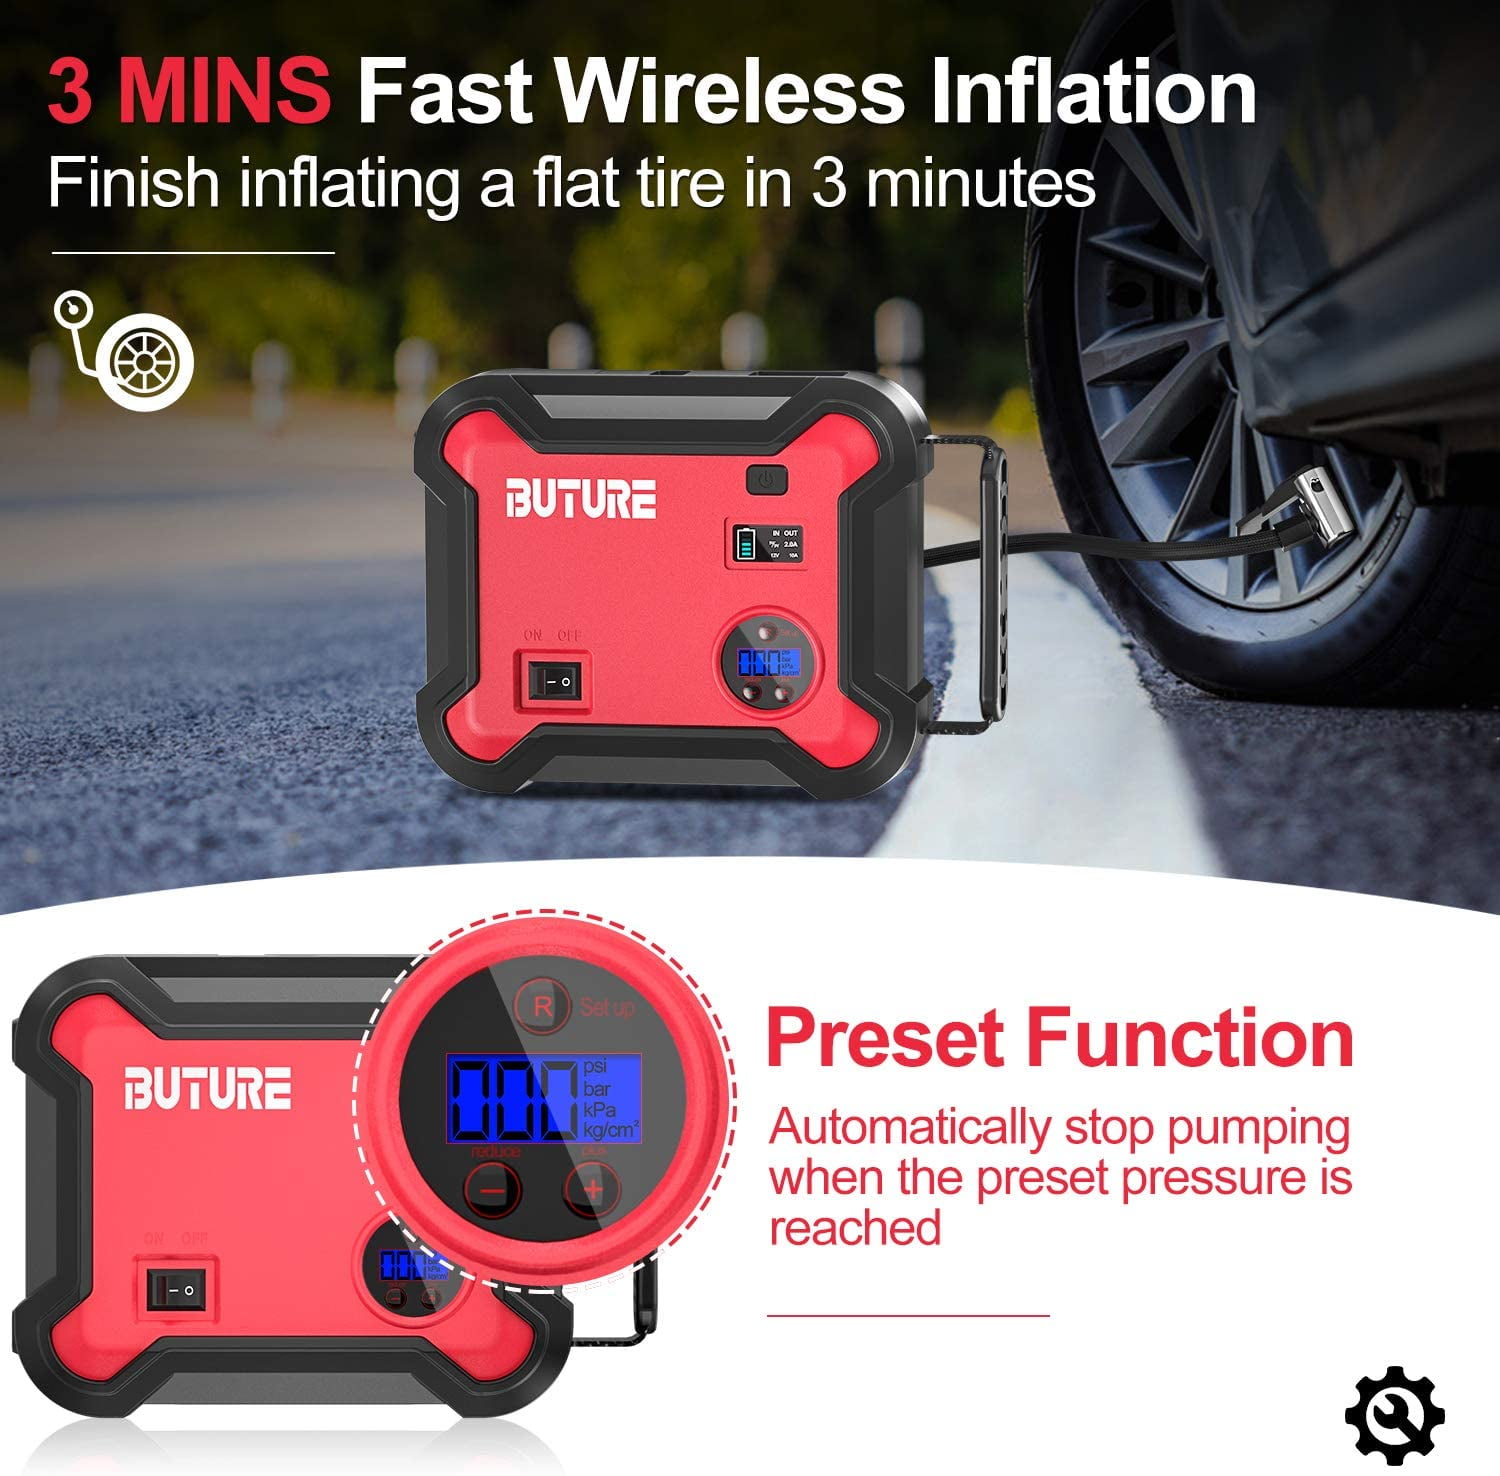 Portable Car Jump Starter with Air Compressor, BUTURE 150PSI 4500A 26800mAh  Booster Pack (All Gas/8.0L Diesel) Digital Tire Inflator, Fast Battery